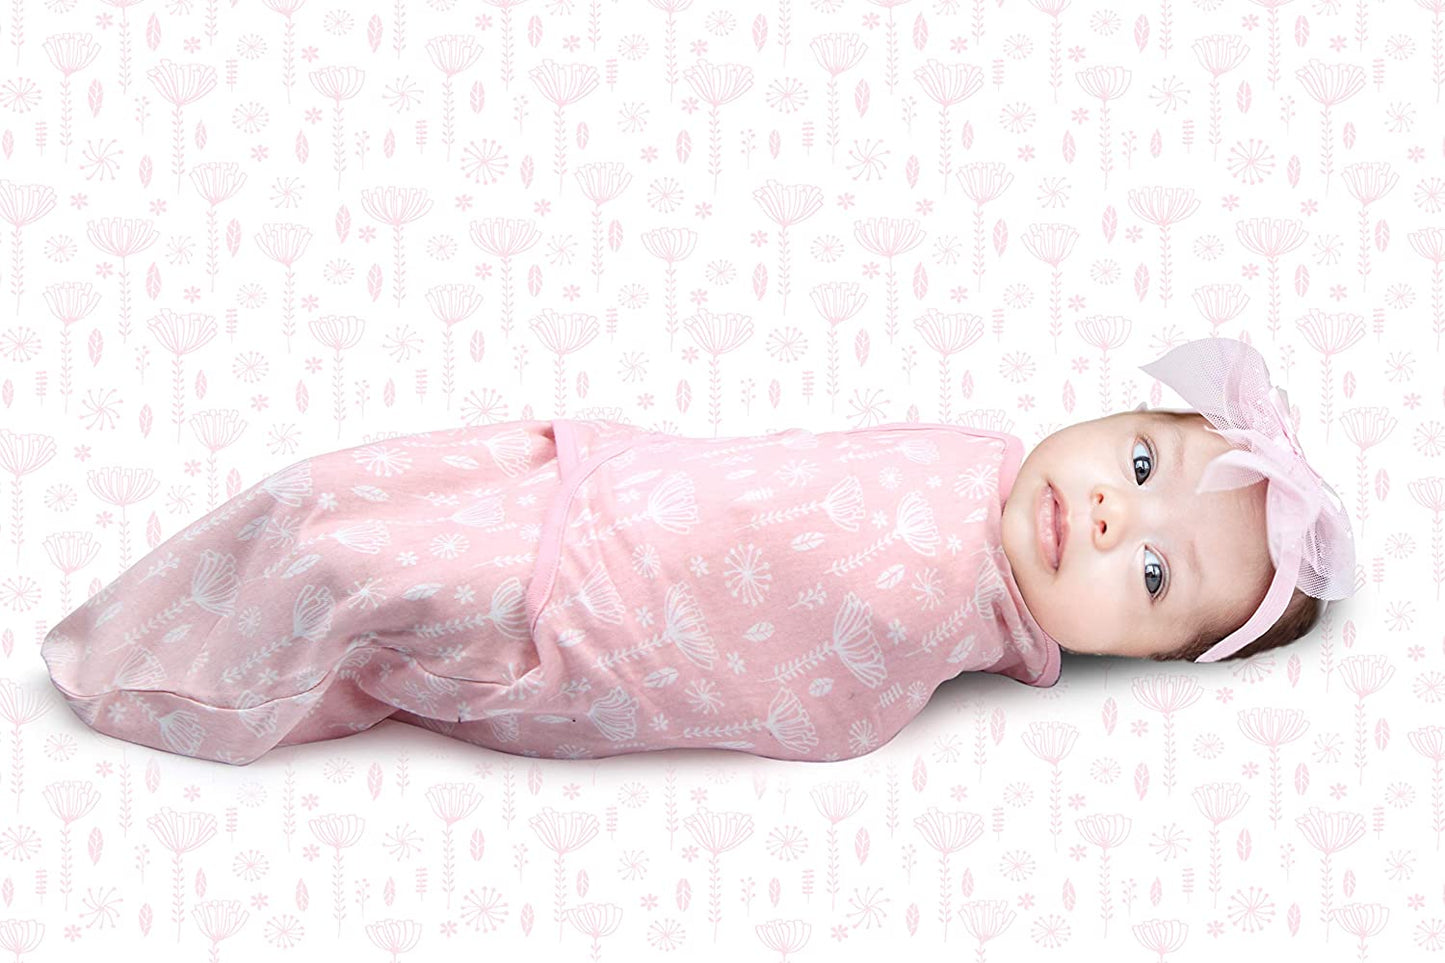 "Cozy and Stylish Baby Swaddle Blanket Set - Perfect for Newborns! Includes 3 Adorable Swaddles in Rose Pink. Ideal for Infants 0-3 Months. Adjustable and Comfortable Sleep Sack for Boys and Girls."